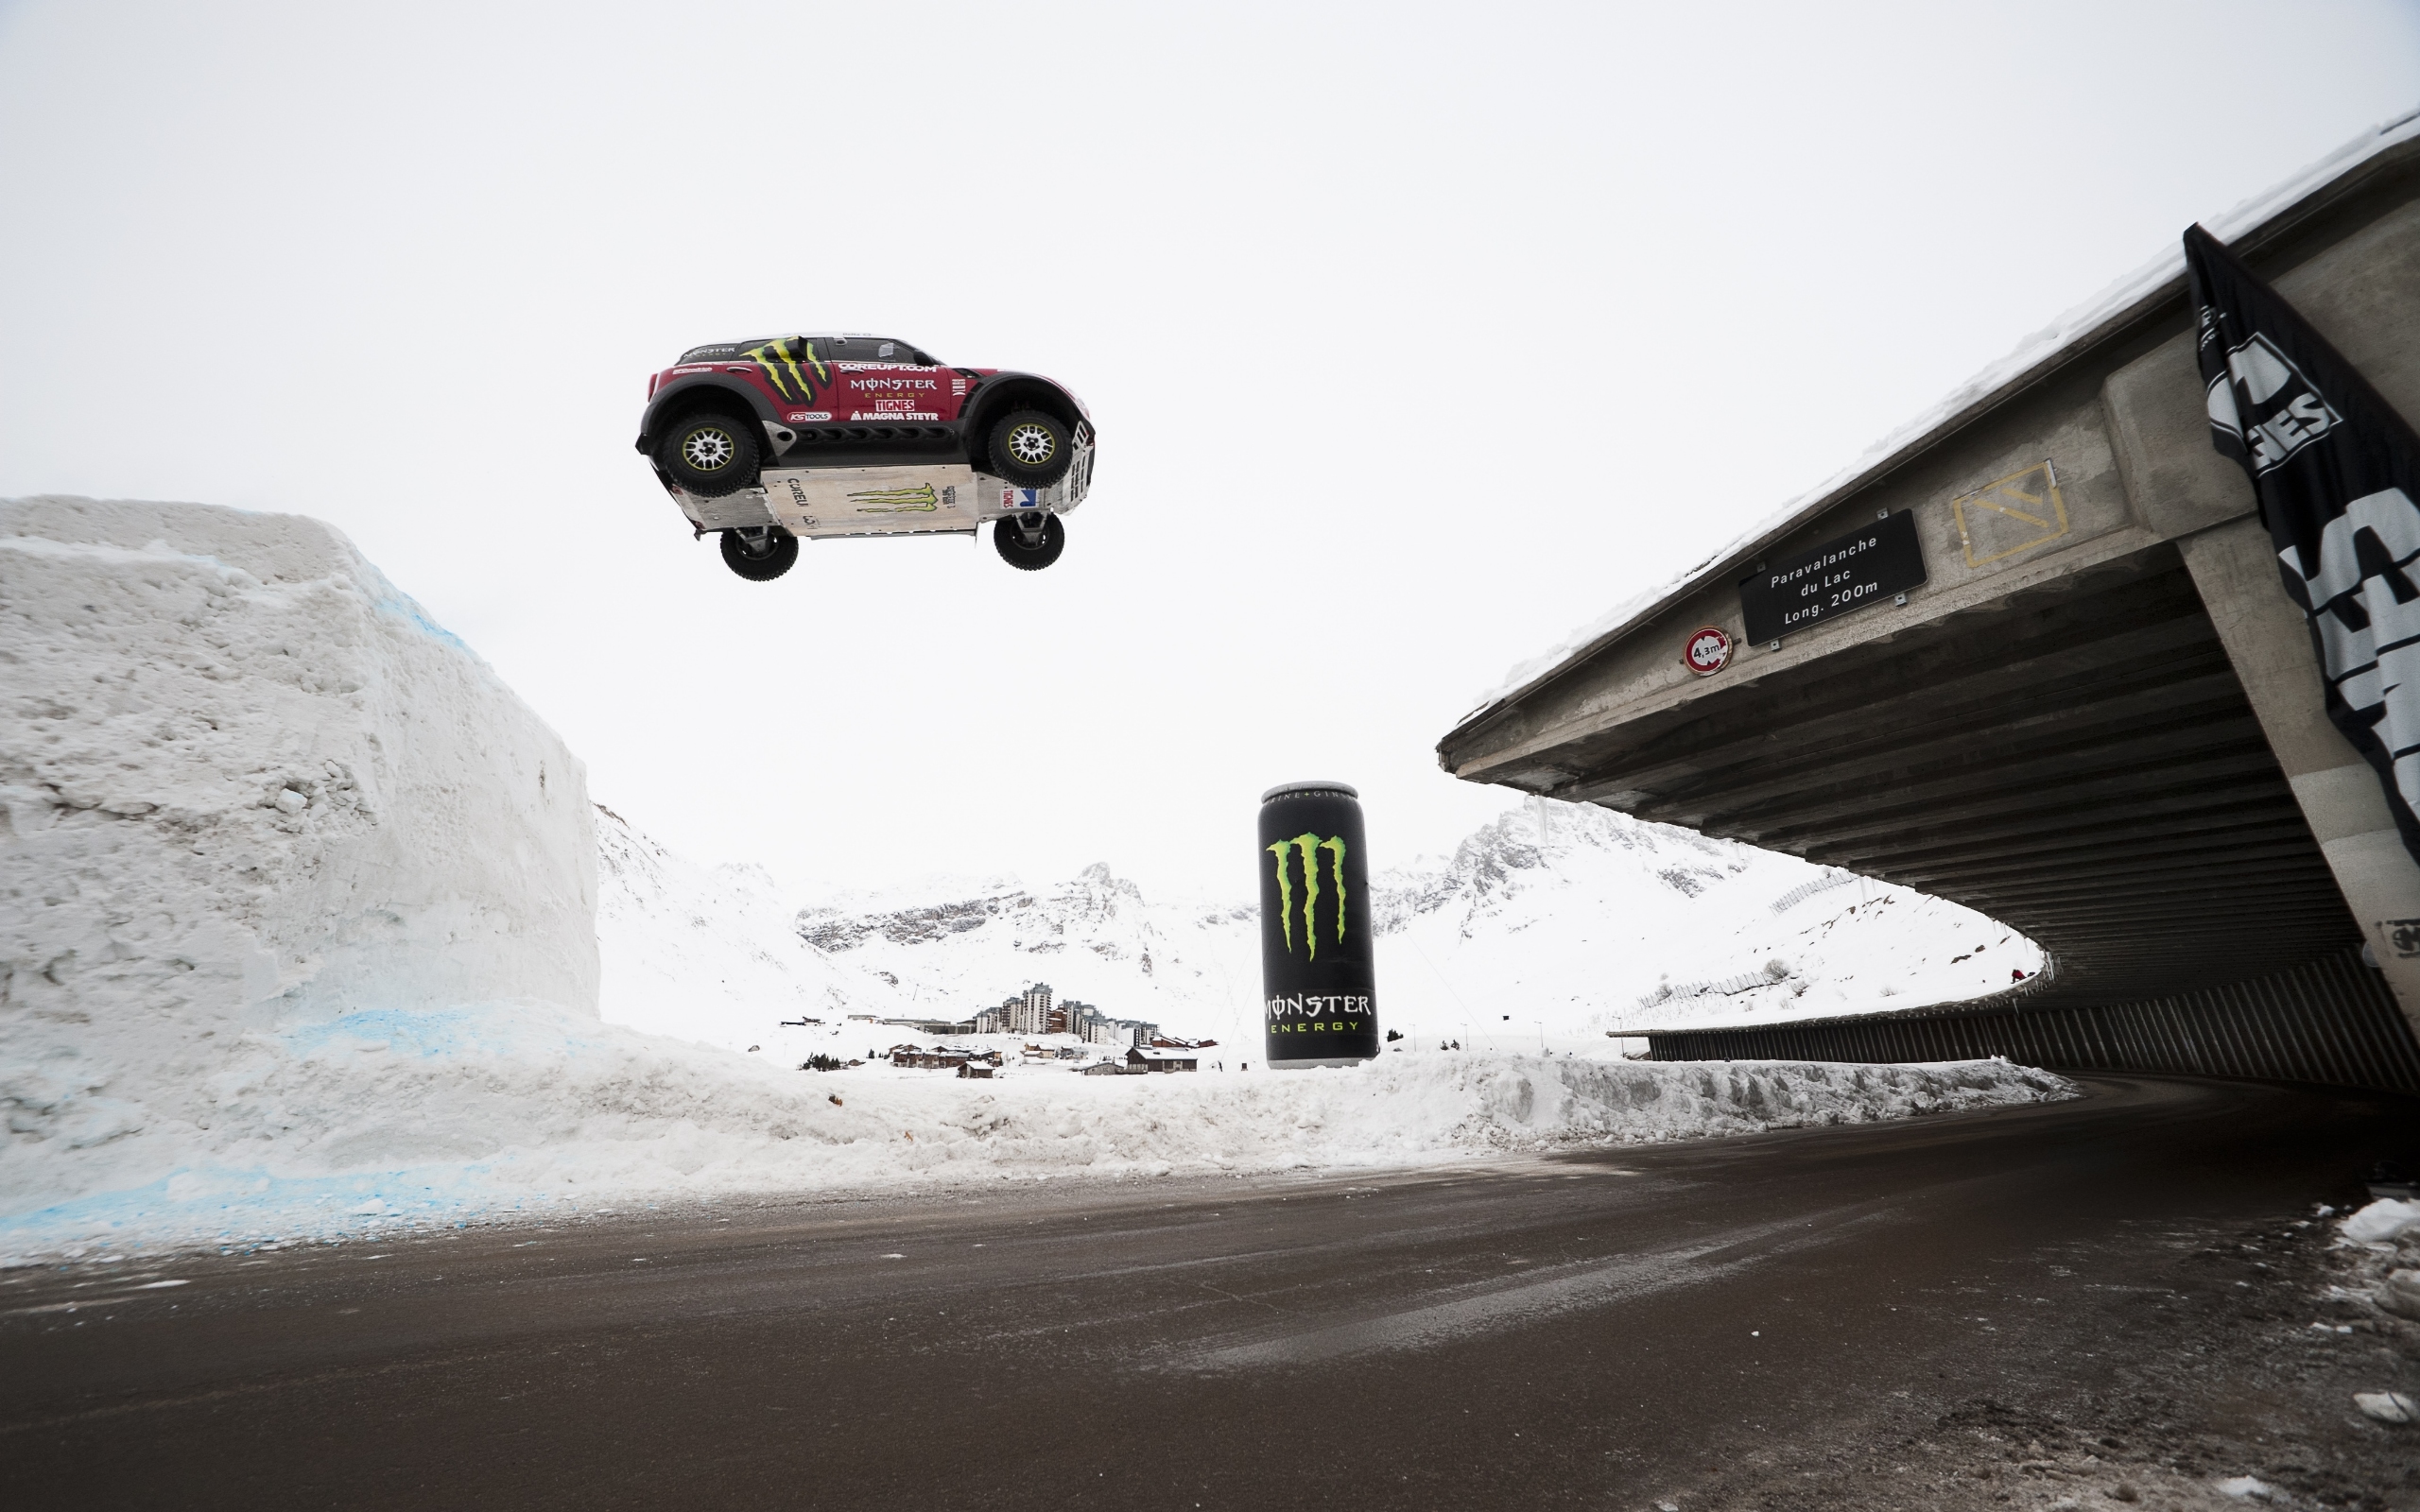 General 2560x1600 jumping Rally Mini Cooper car sport vehicle race cars snow Monster Energy flying winter snowy mountain Mini British cars